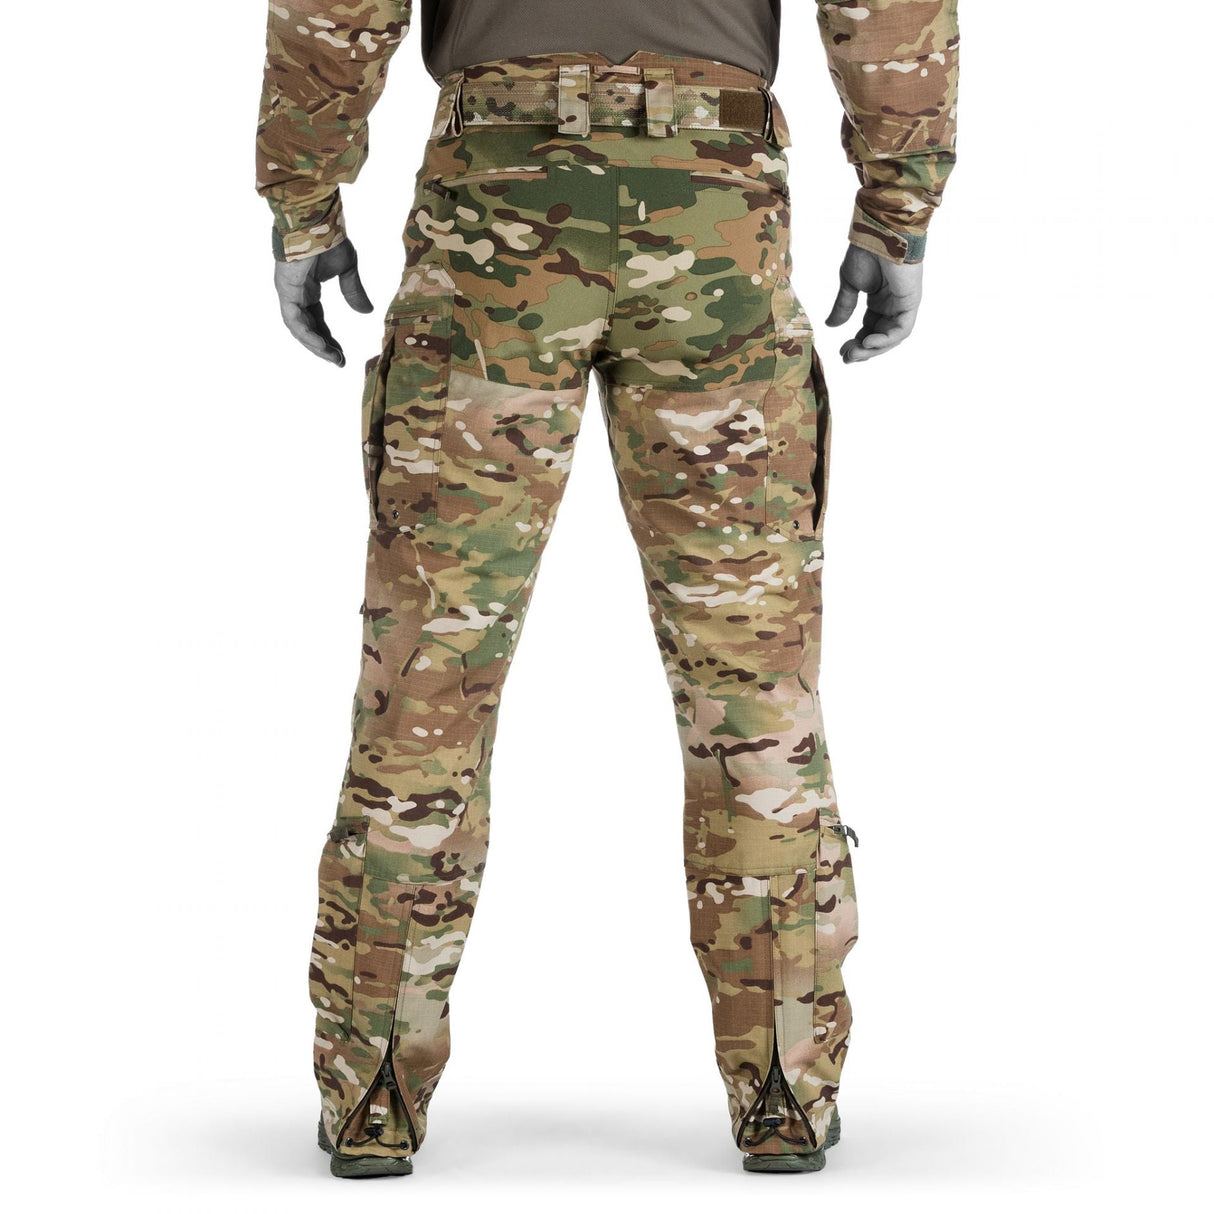 Tactical Combat Pants: Designed for hot environments, functionality, and storage capacity.